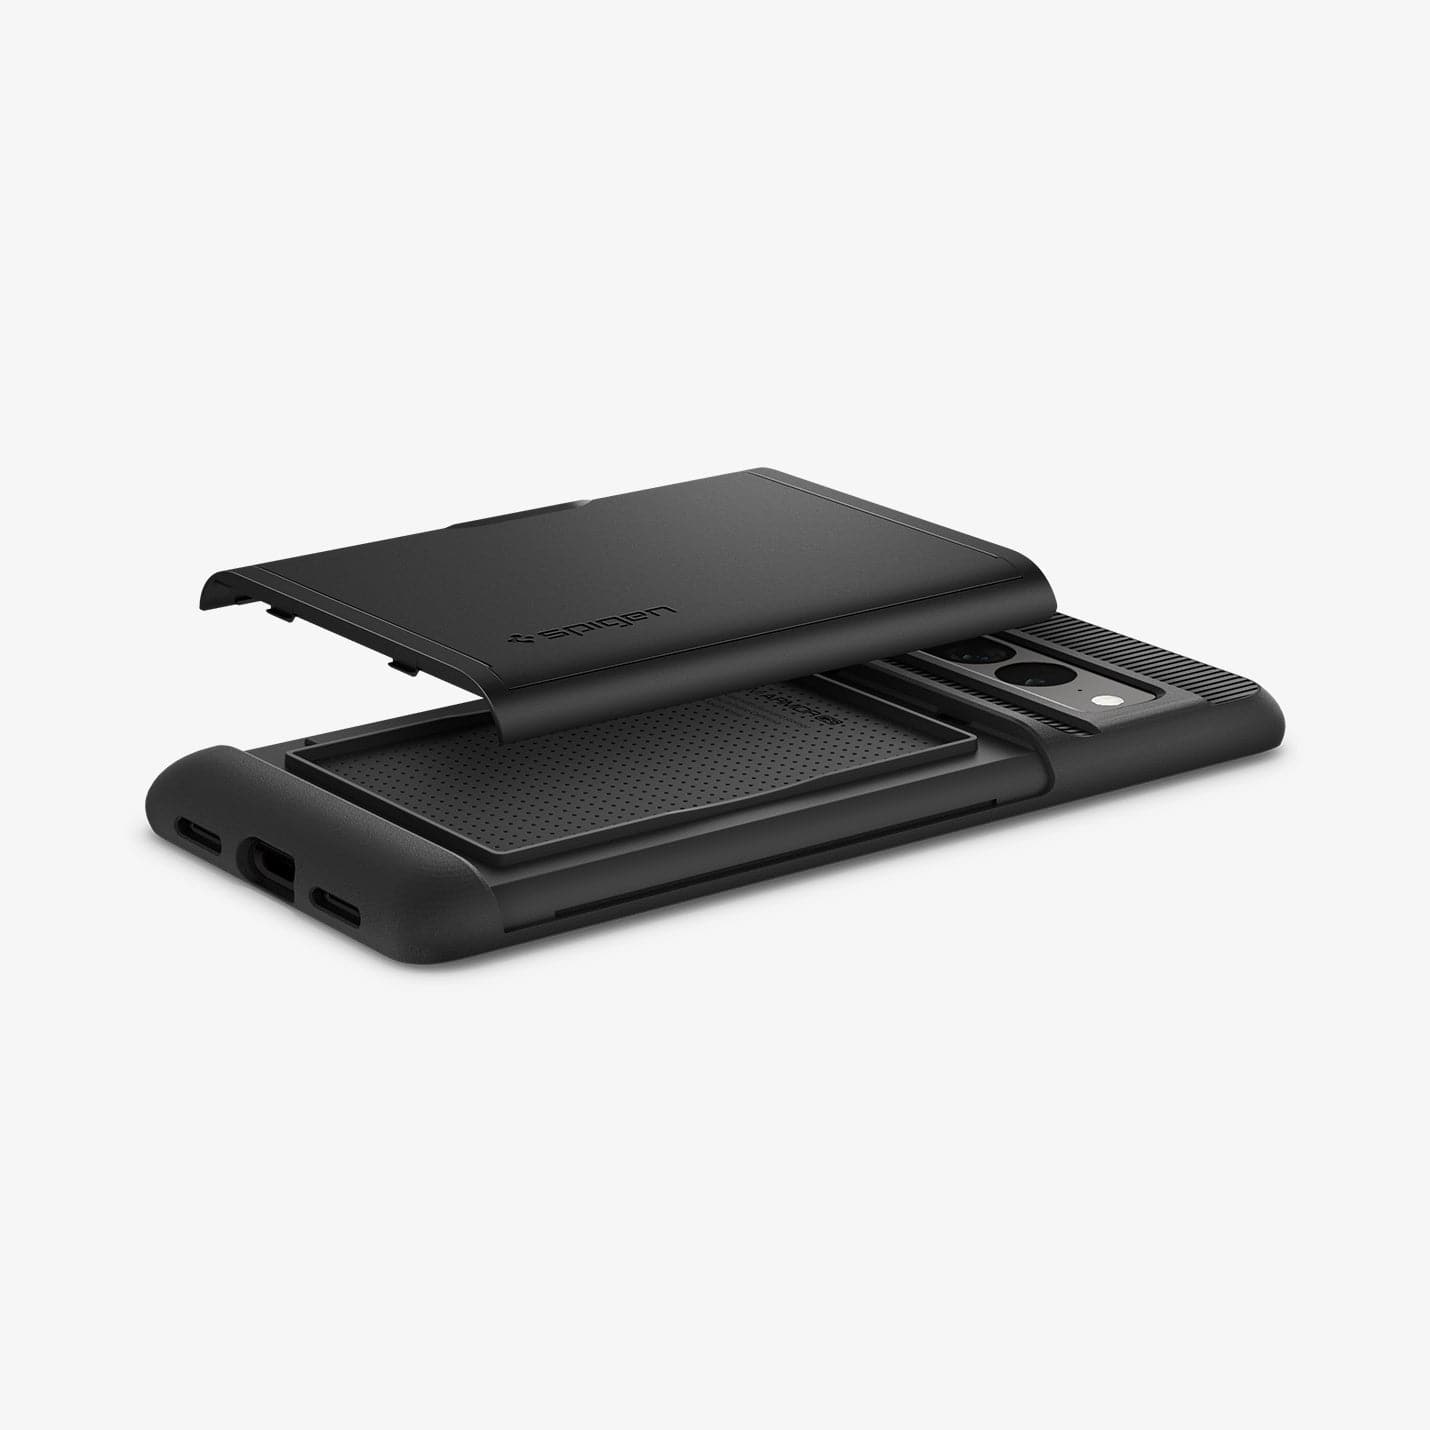 ACS04731 - Pixel 7 Pro Case Slim Armor CS in black showing the back card slot cover hovering above case